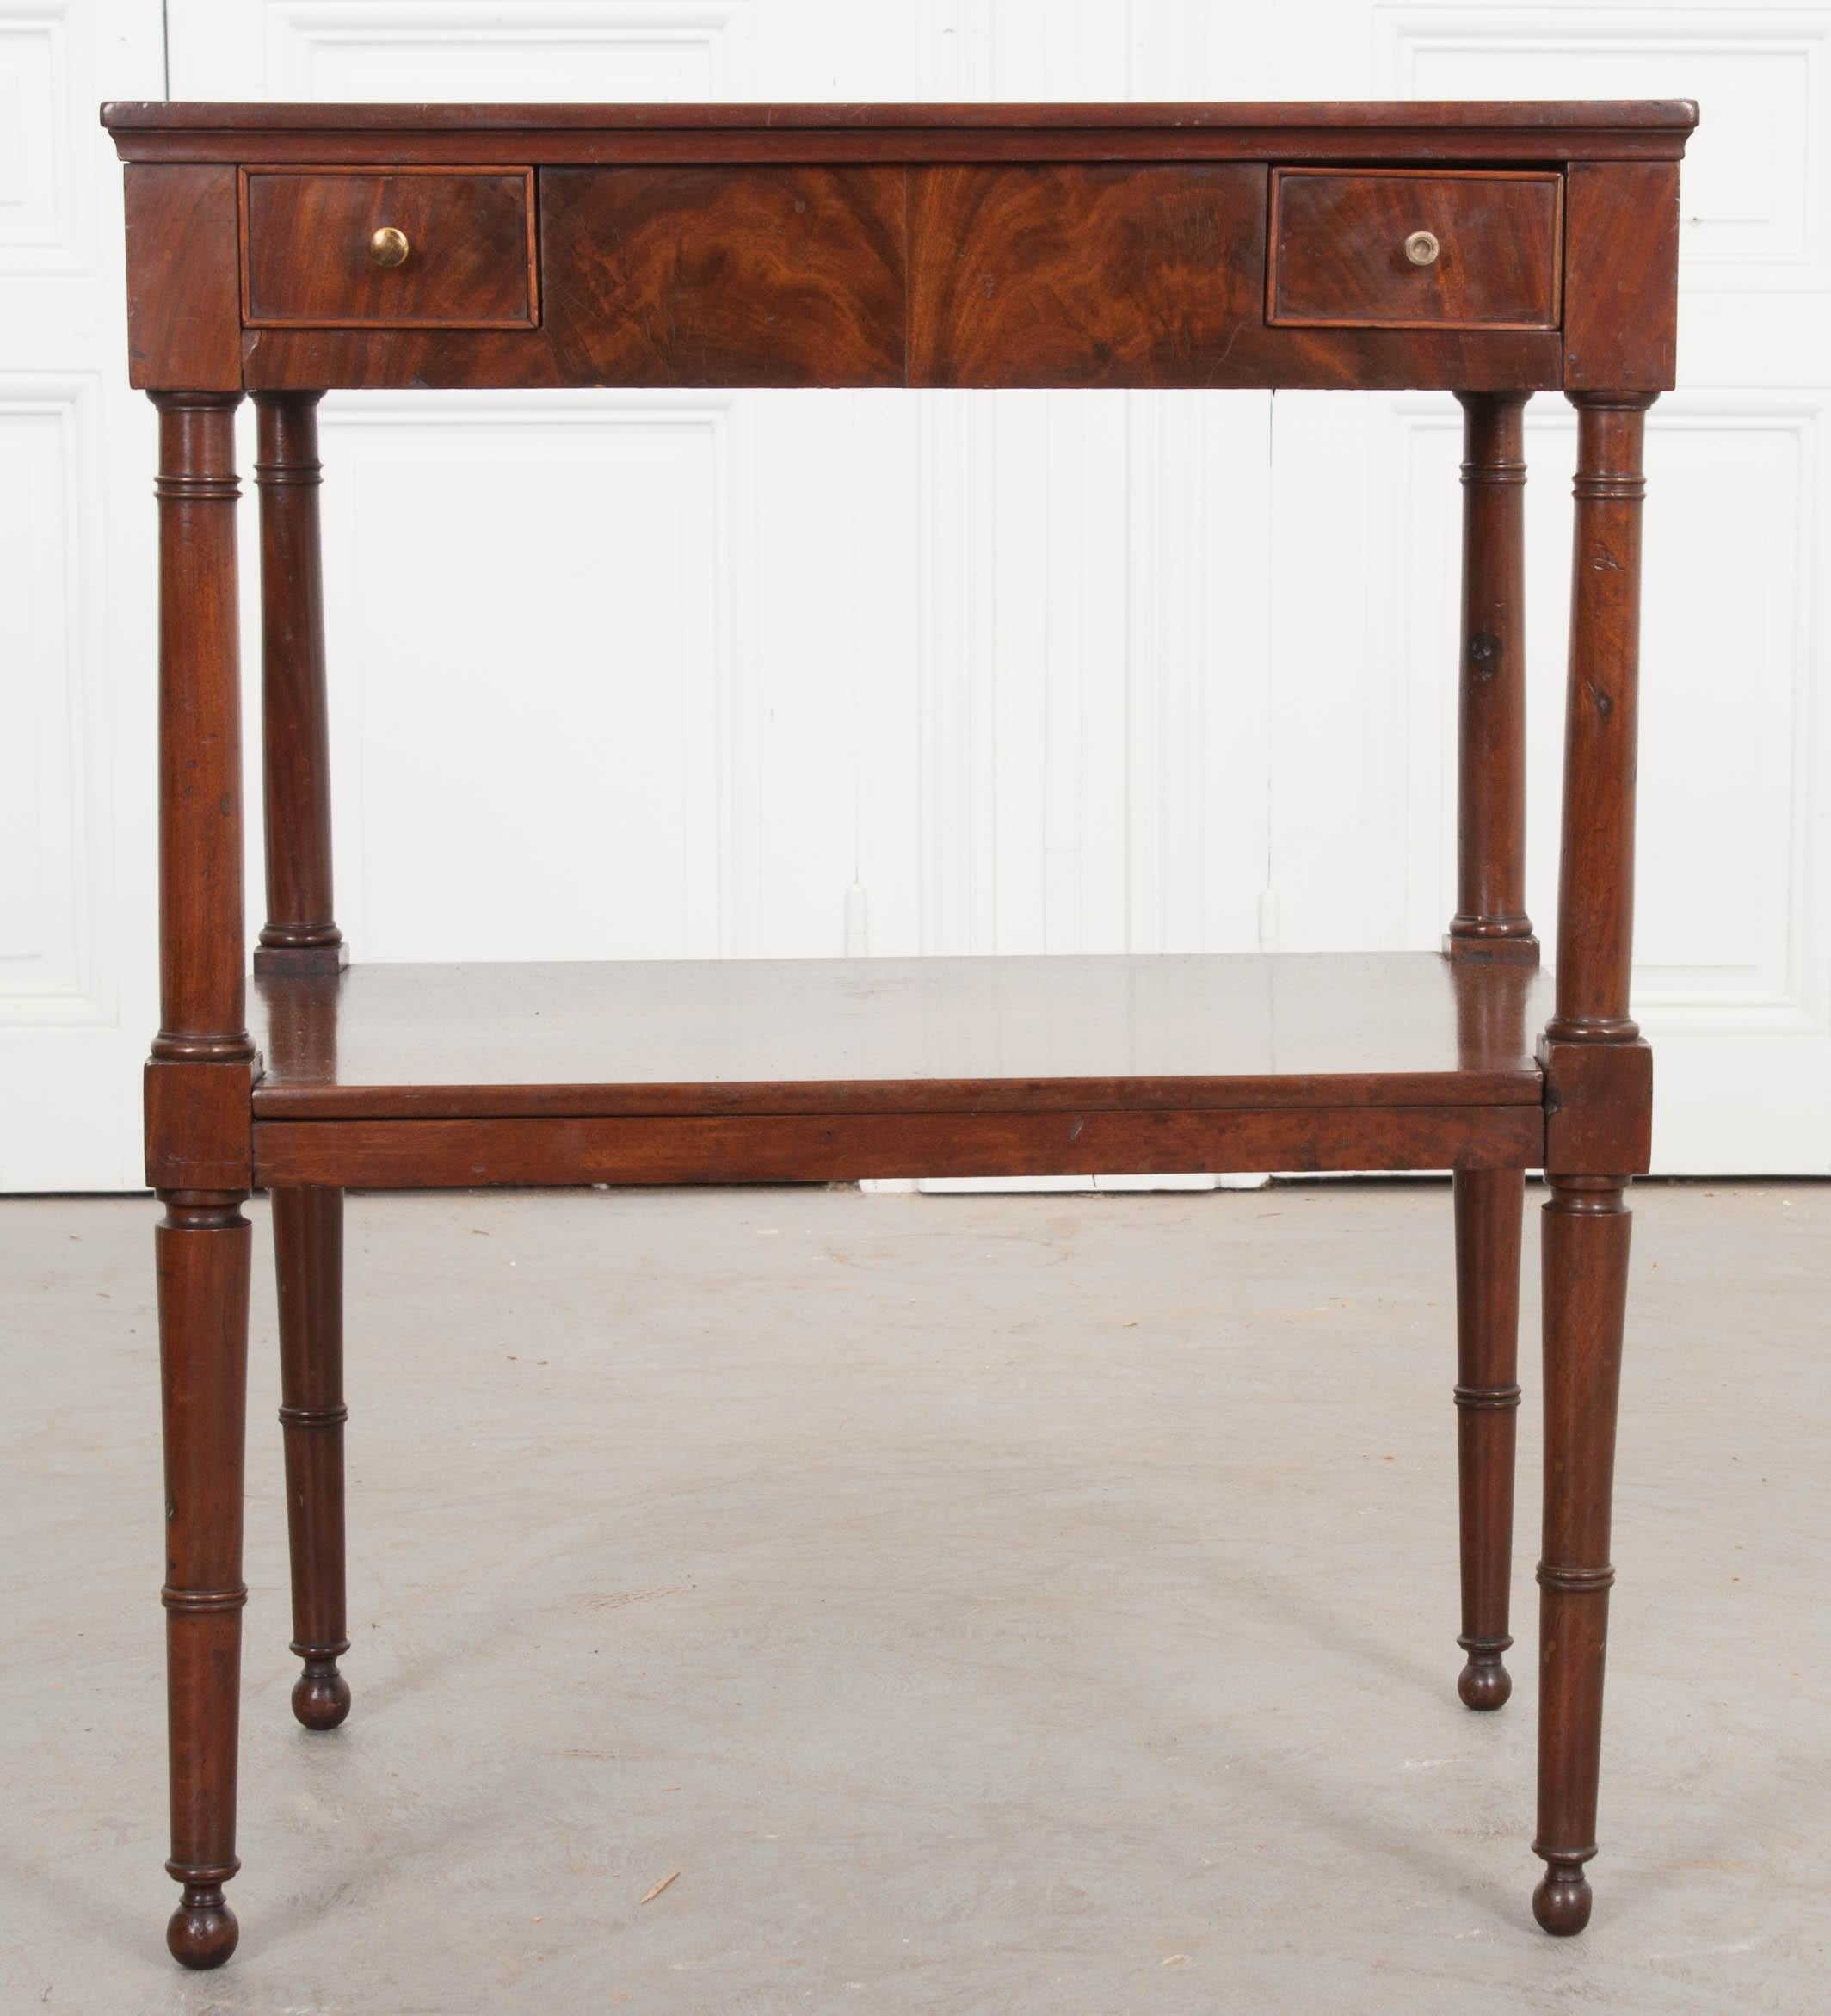 French 19th century Directoire-style mahogany occasional table, with grey-veined white marble top above an apron fitted with two small drawers over an under-shelf, and raised on tapering notched legs with ball feet.